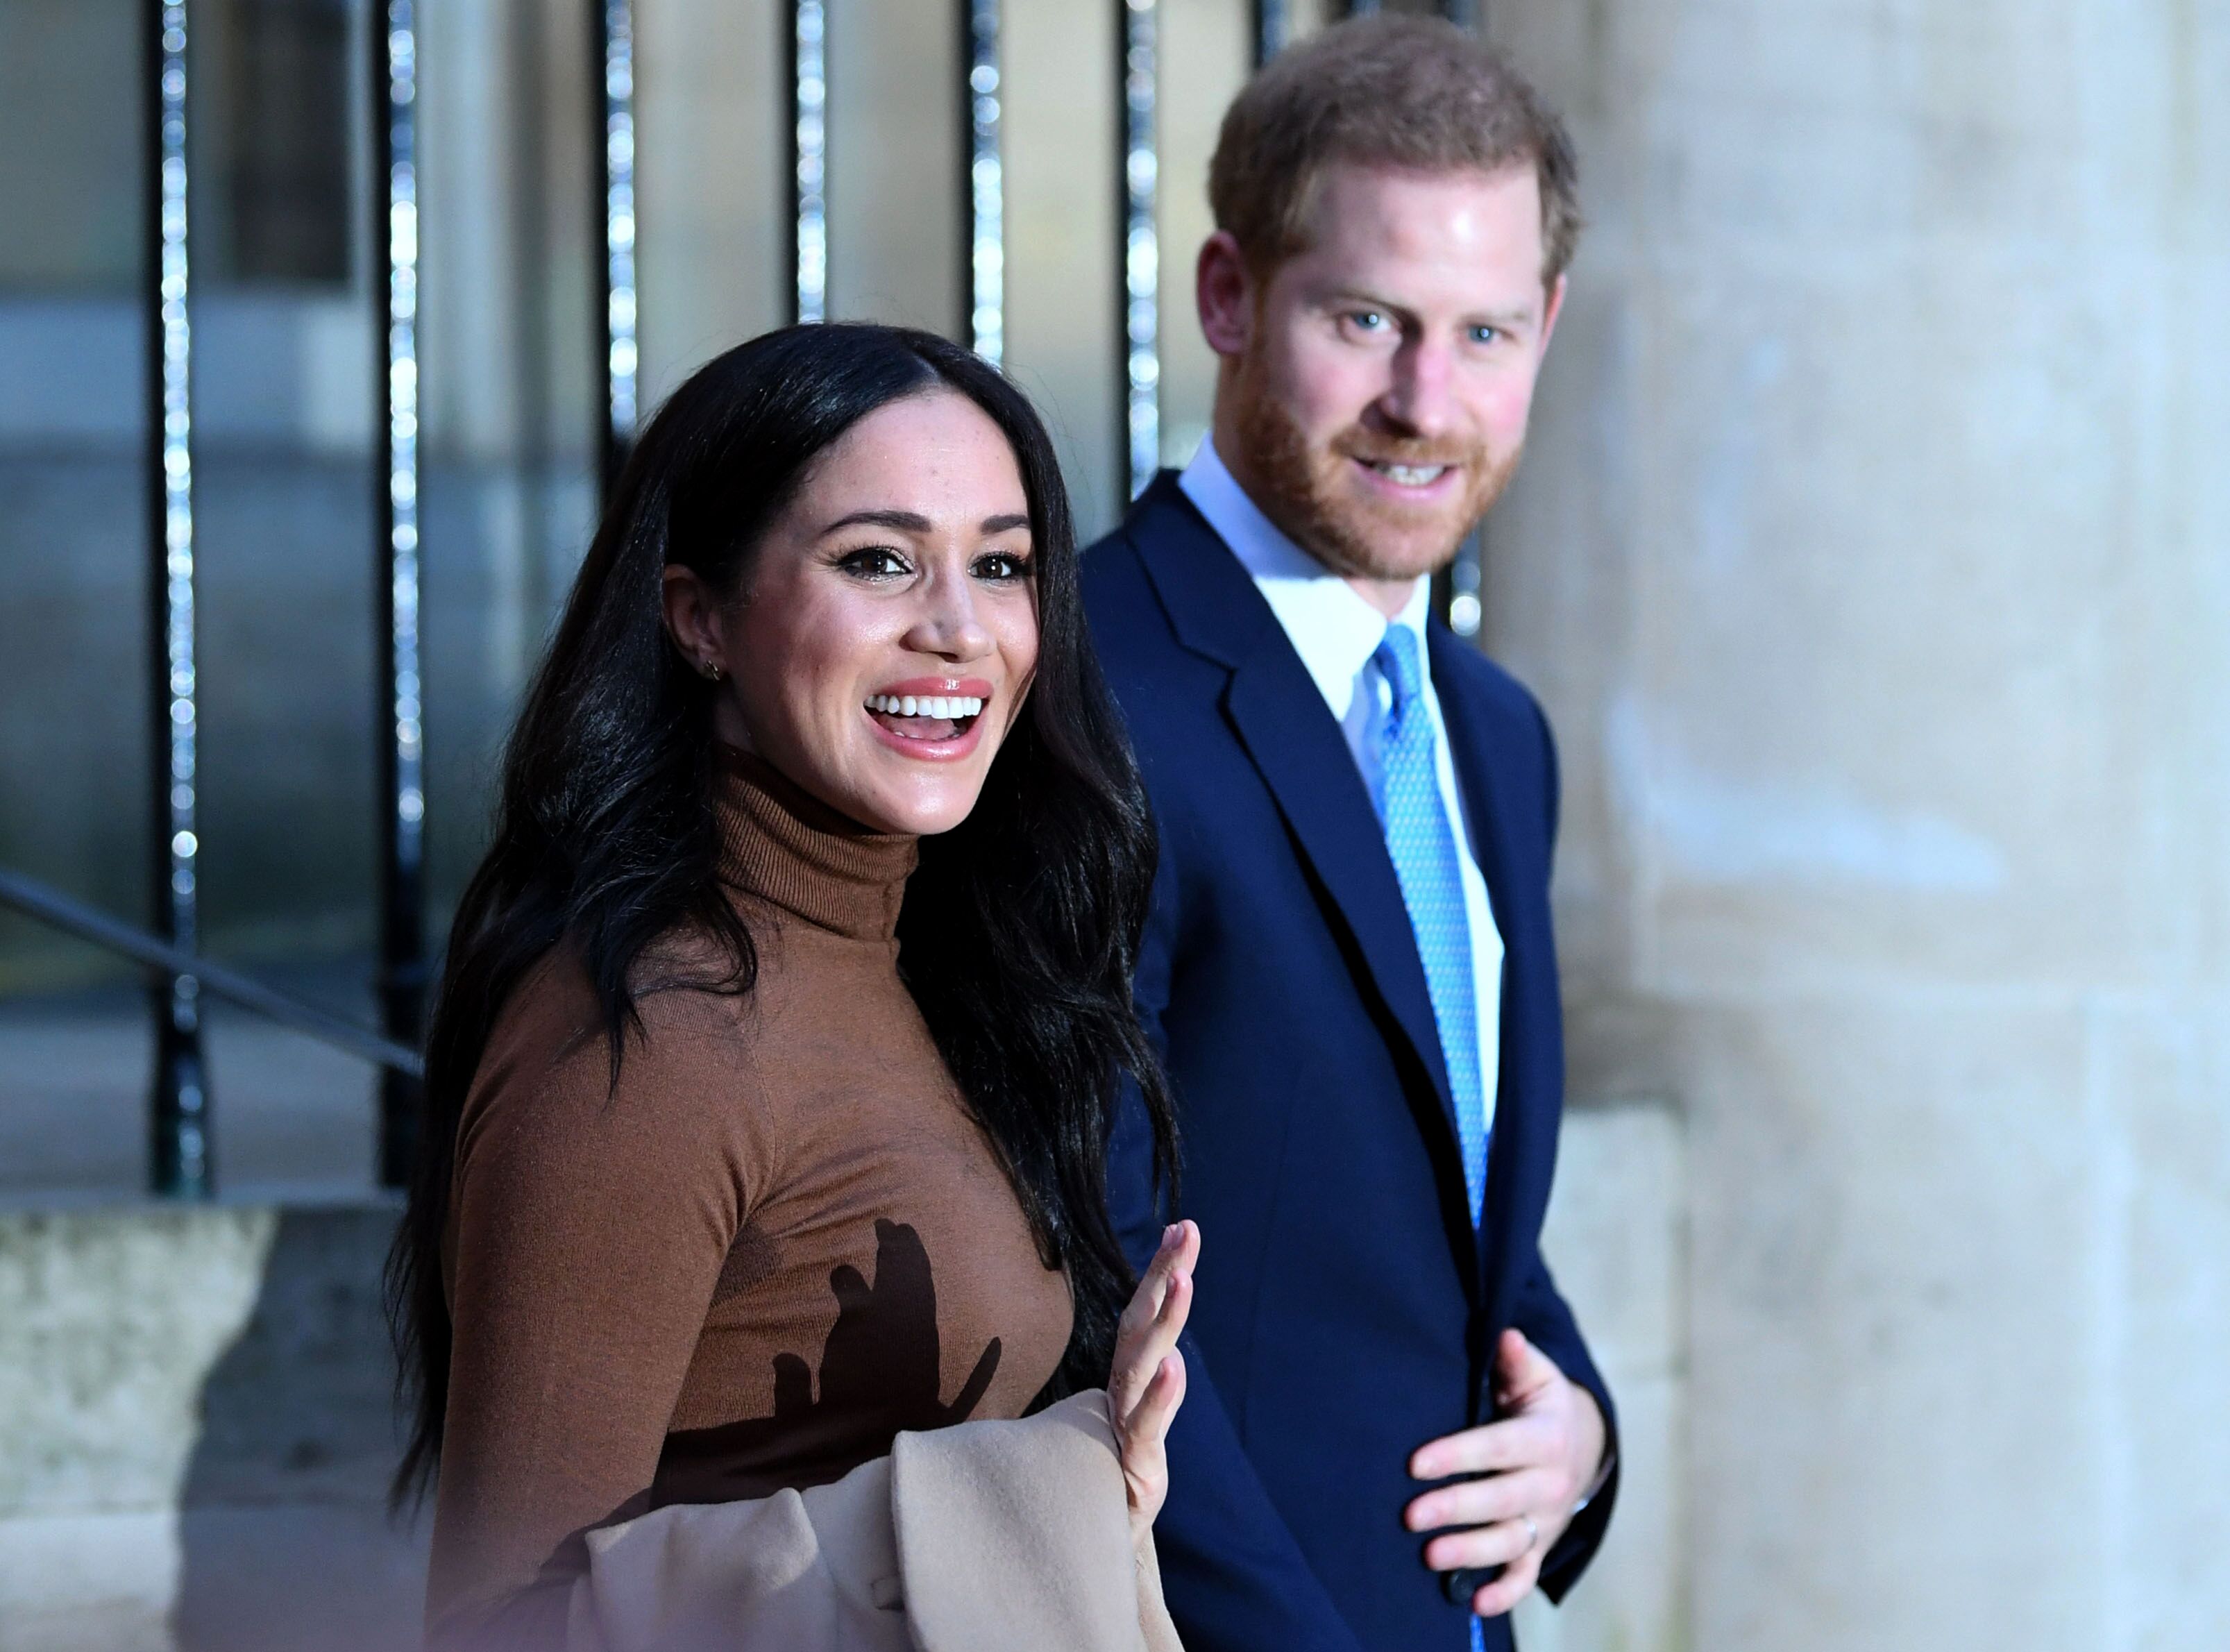  Prince Harry and Meghan Markle react after their visit to Canada House. | Source: Getty Images